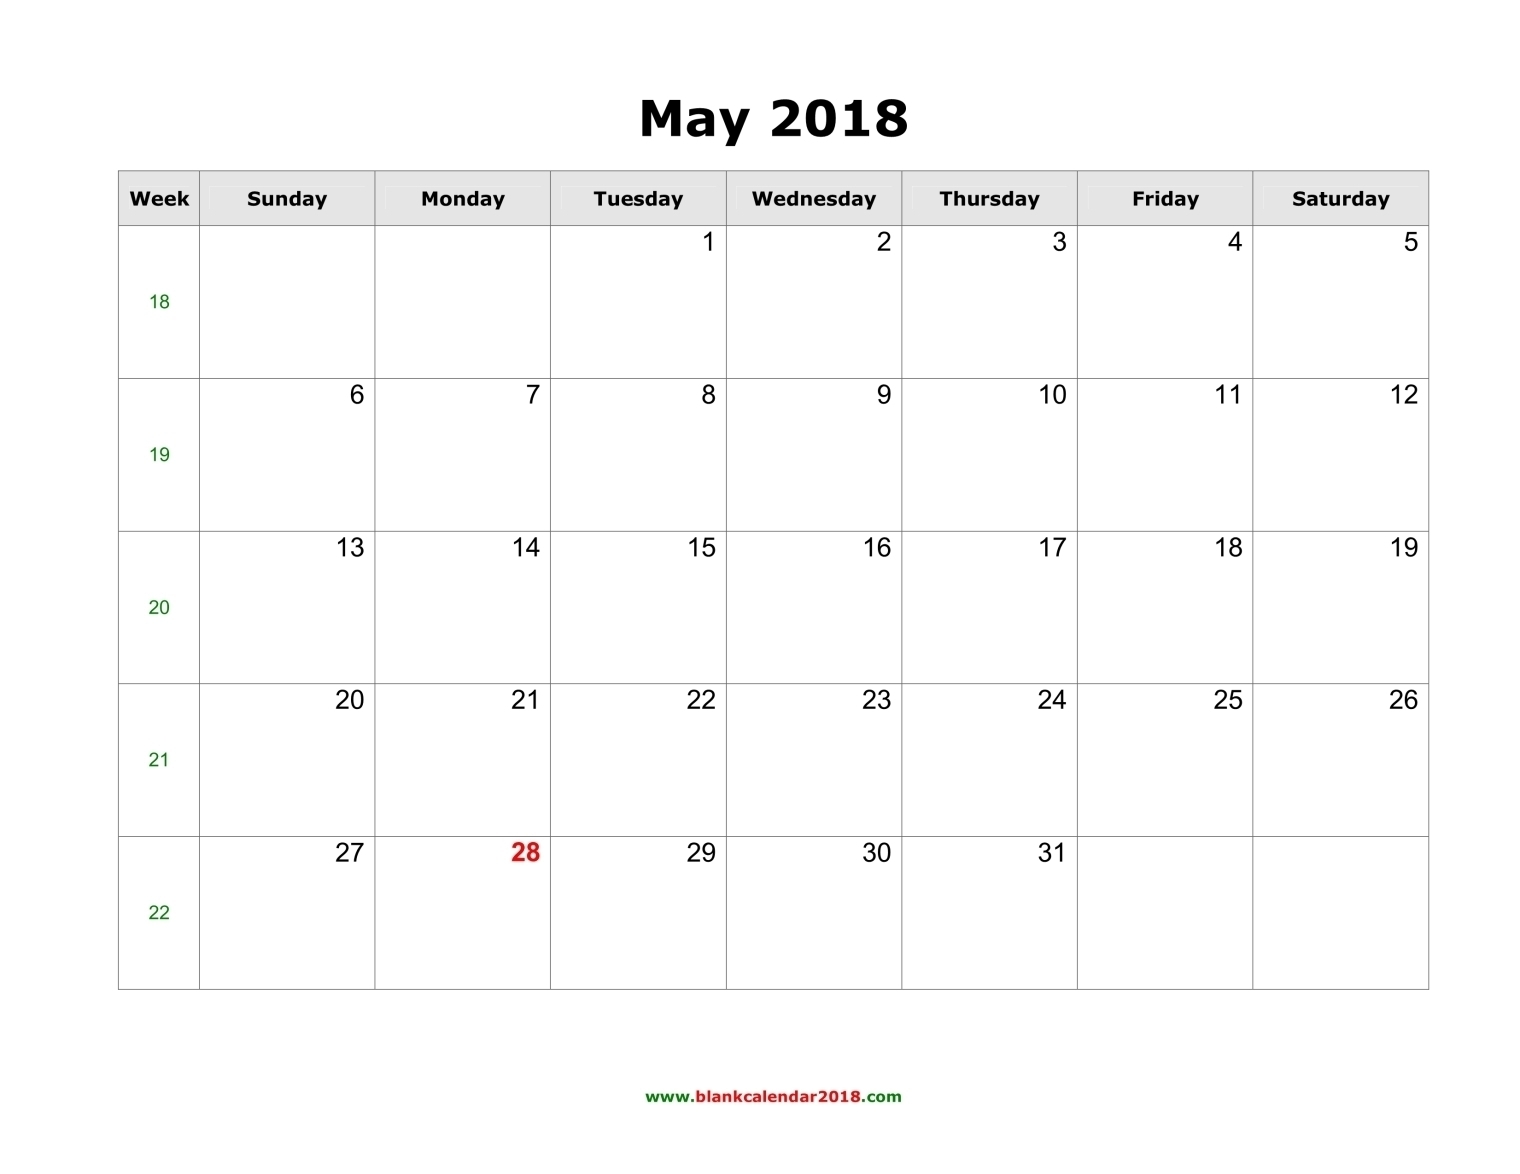 Blank Calendar For May 2018 within To Fill In Blank Calendar